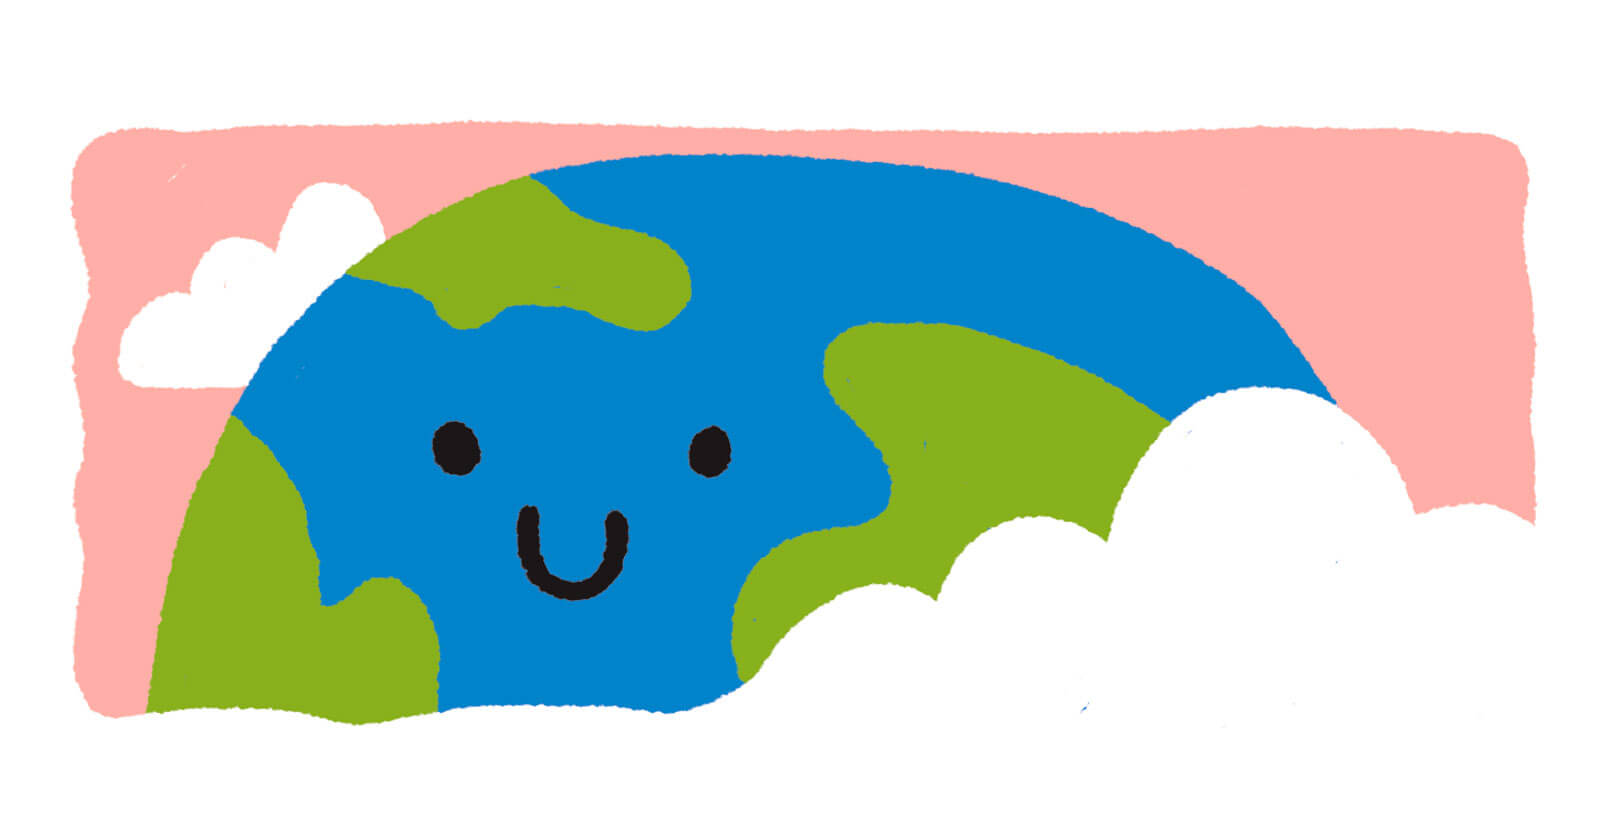 Illustration of a smiling Earth surrounded by clouds